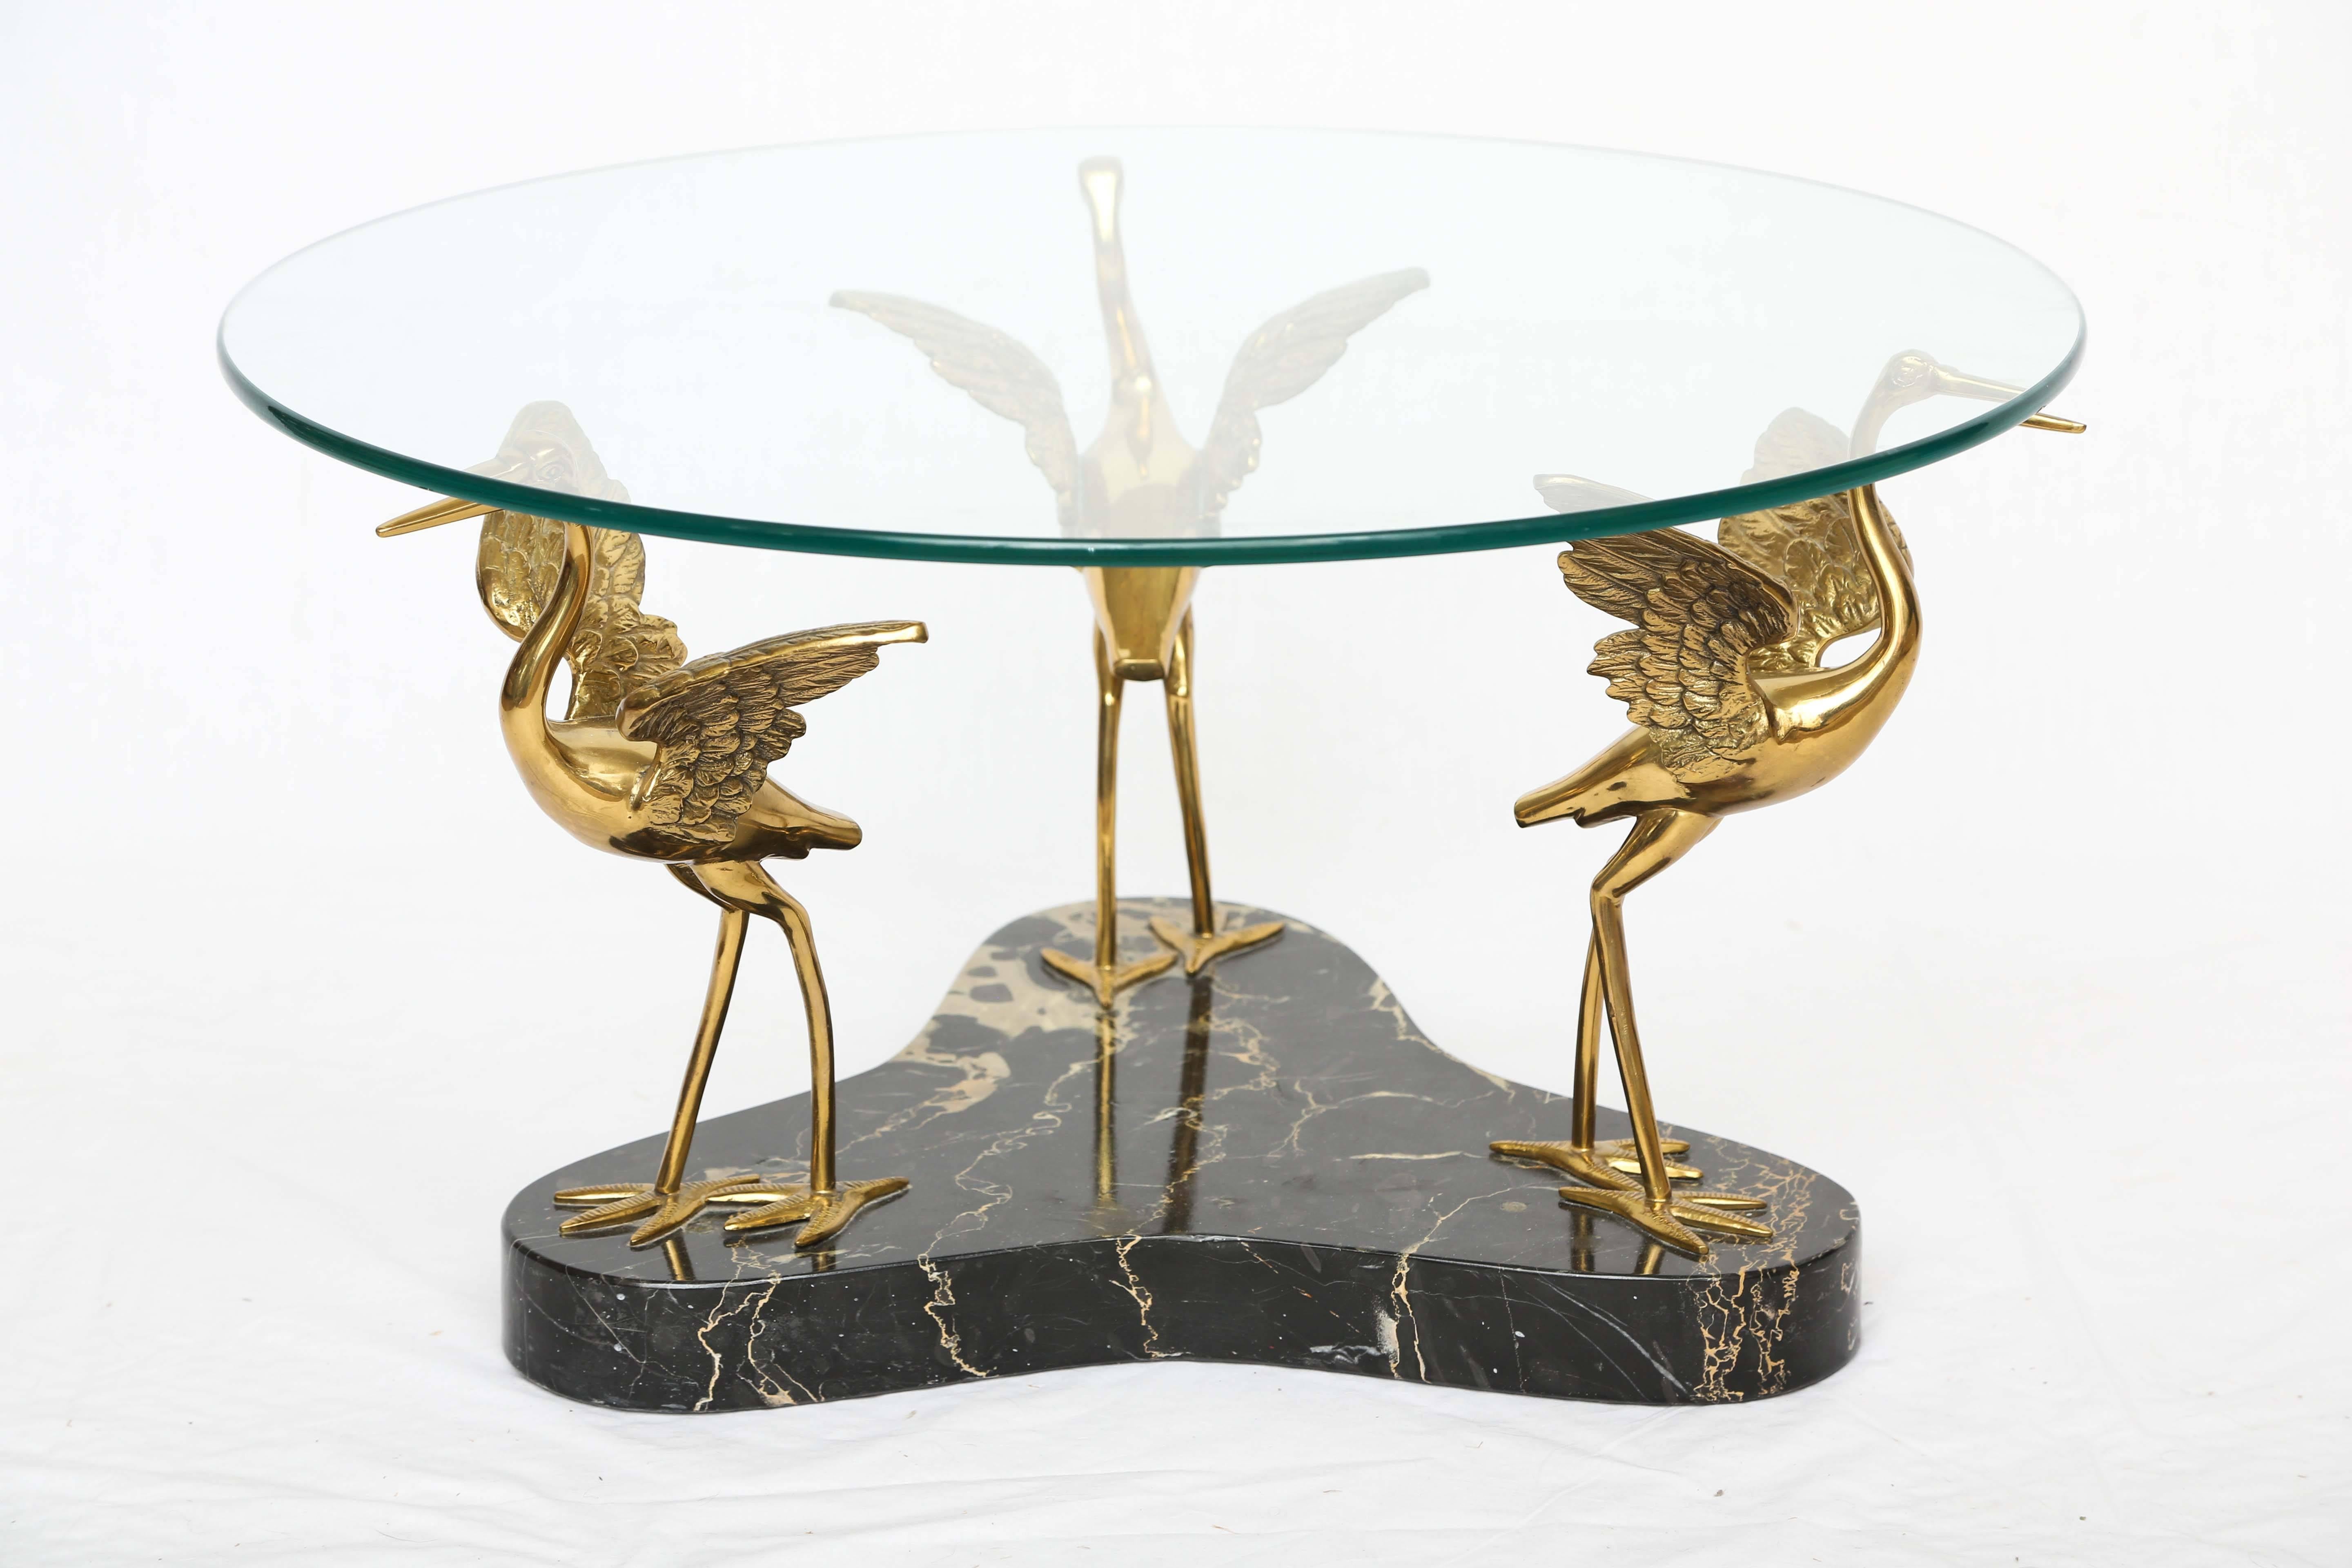 We offer a marble and brass birds coffee table in the style of Willy Daro. The birds are made with great craftsmanship and the base is black marble with a unique pattern.
The round glass top sits on the beaks of the birds.